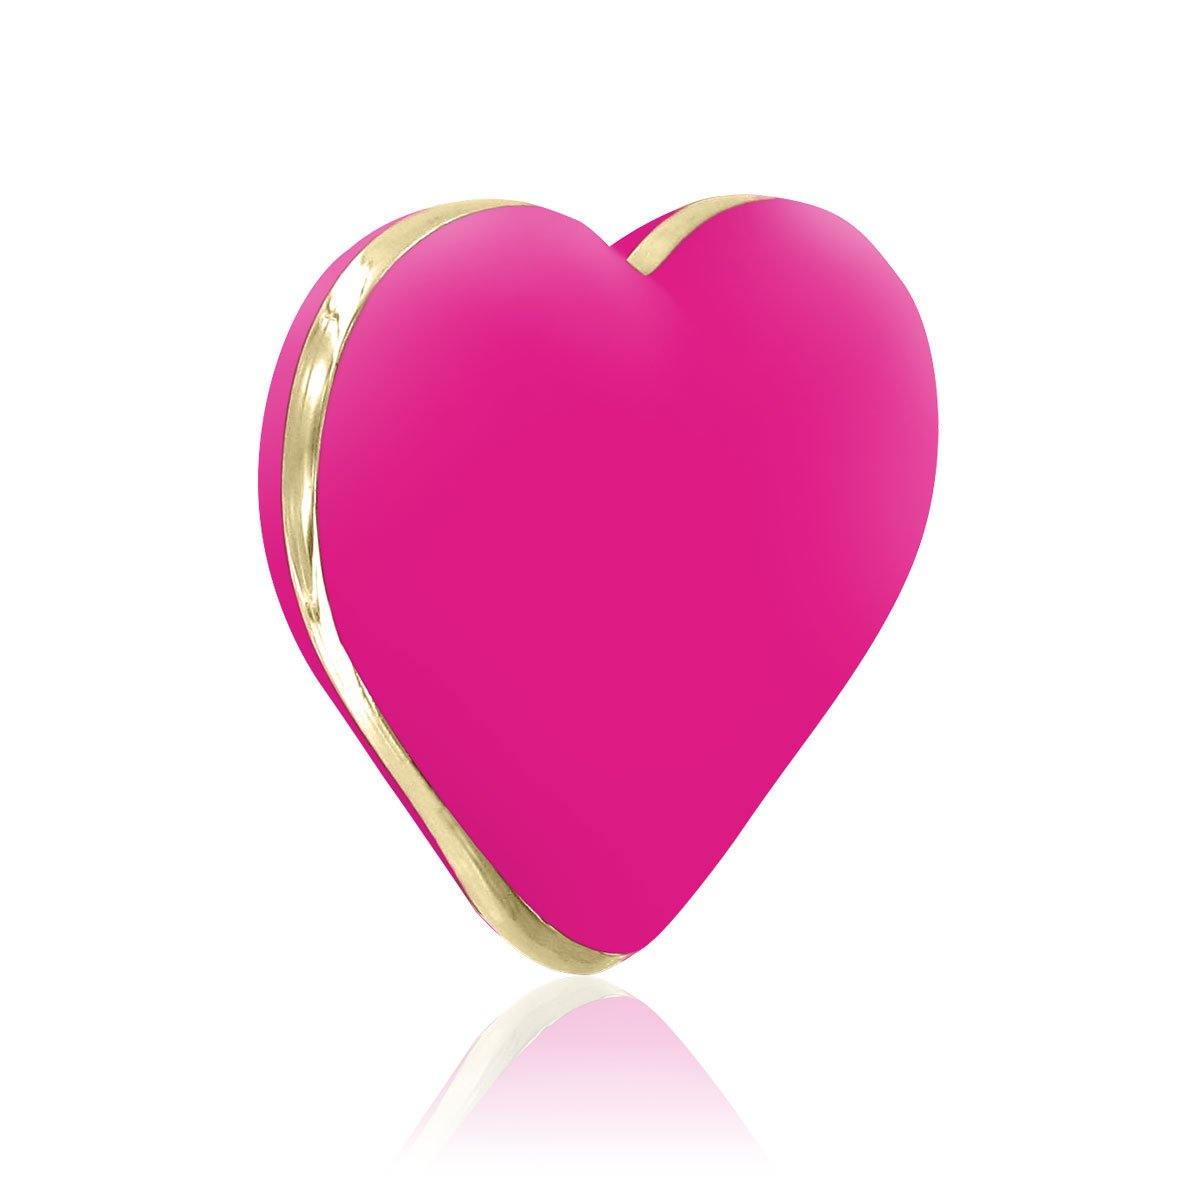 Rianne S Heart Vibe - Buy At Luxury Toy X - Free 3-Day Shipping